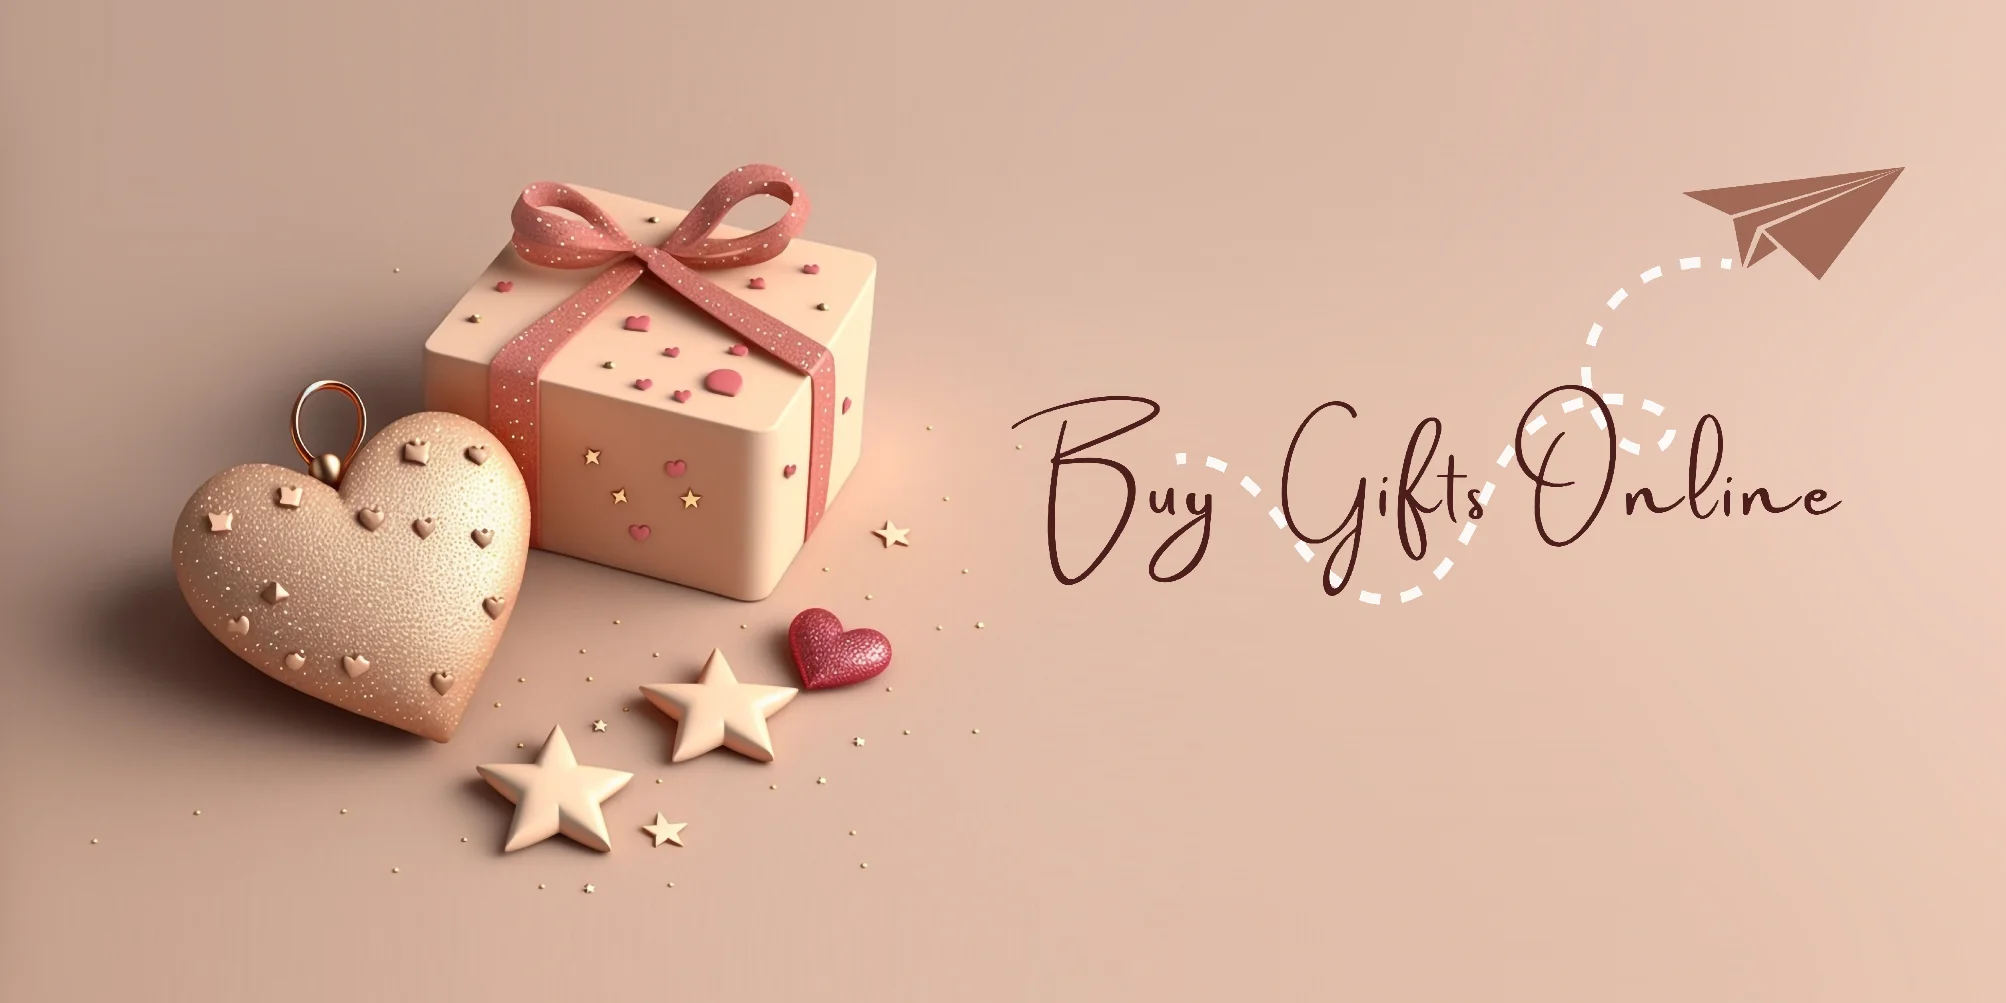 Buy Gifts Online